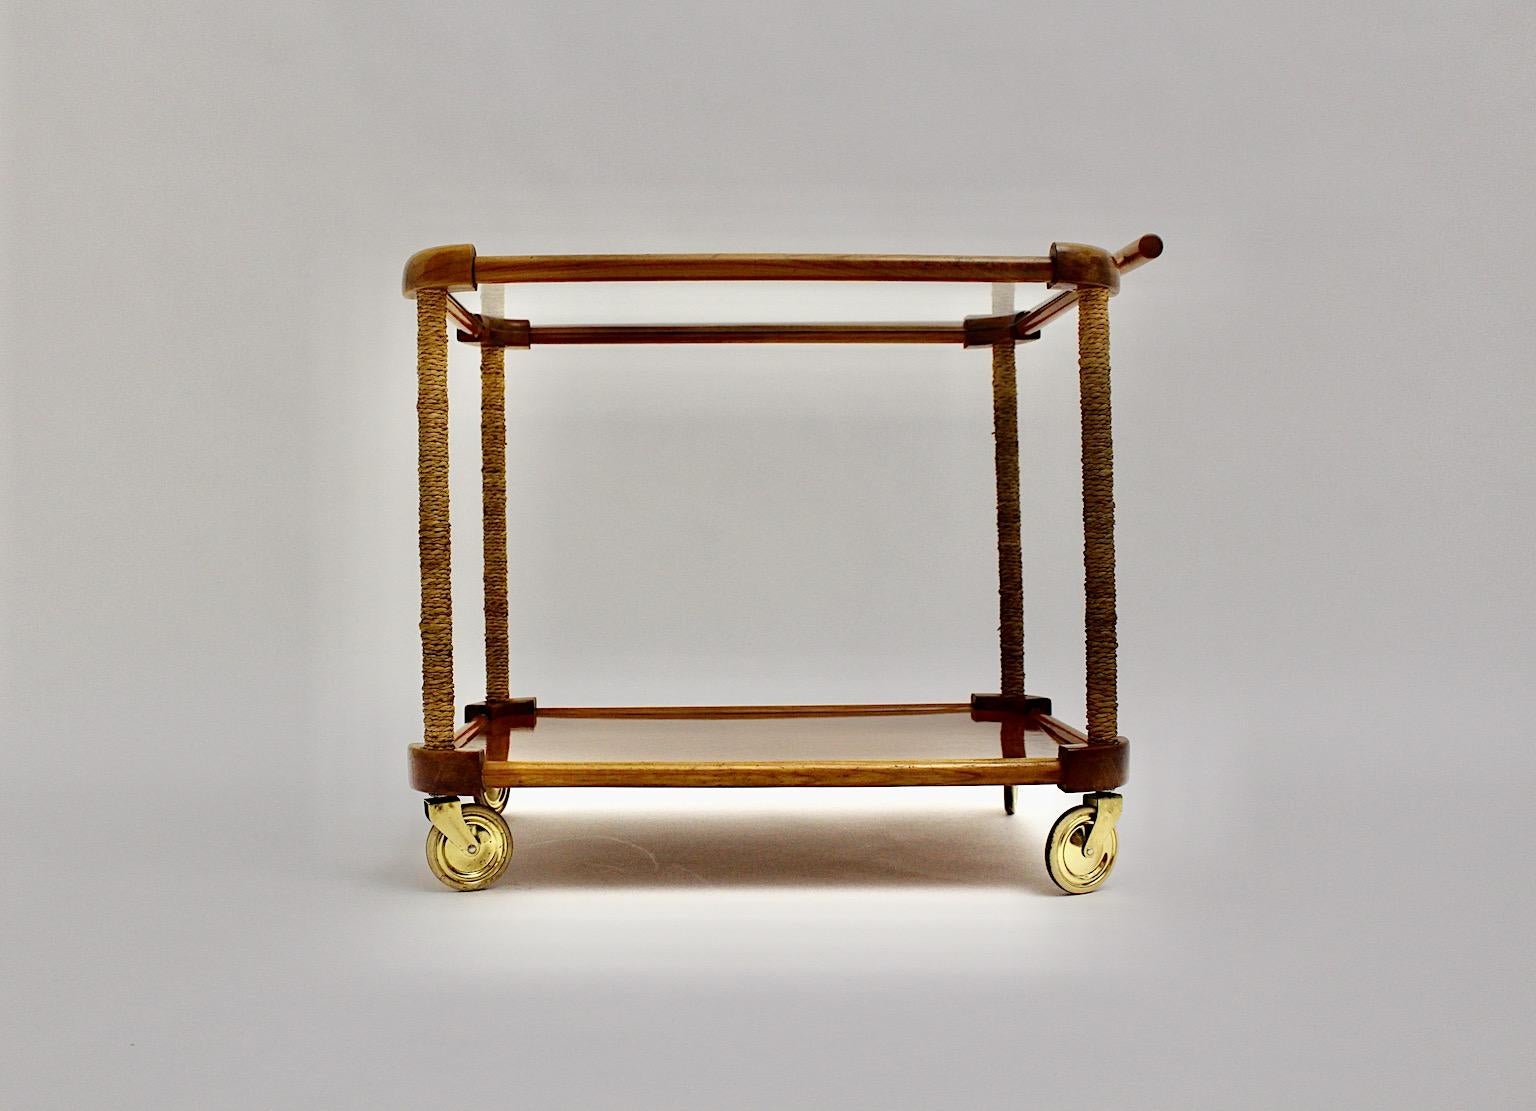 Mid-Century Modern organic vintage bar cart or tea cart from cherry, brass and cords by Max Kment Kunstgewerbliche Werkstätten 1950s Austria.
While the bar cart shows two tiers, one tier made from clear glass and one tier from plywood. Wrapped